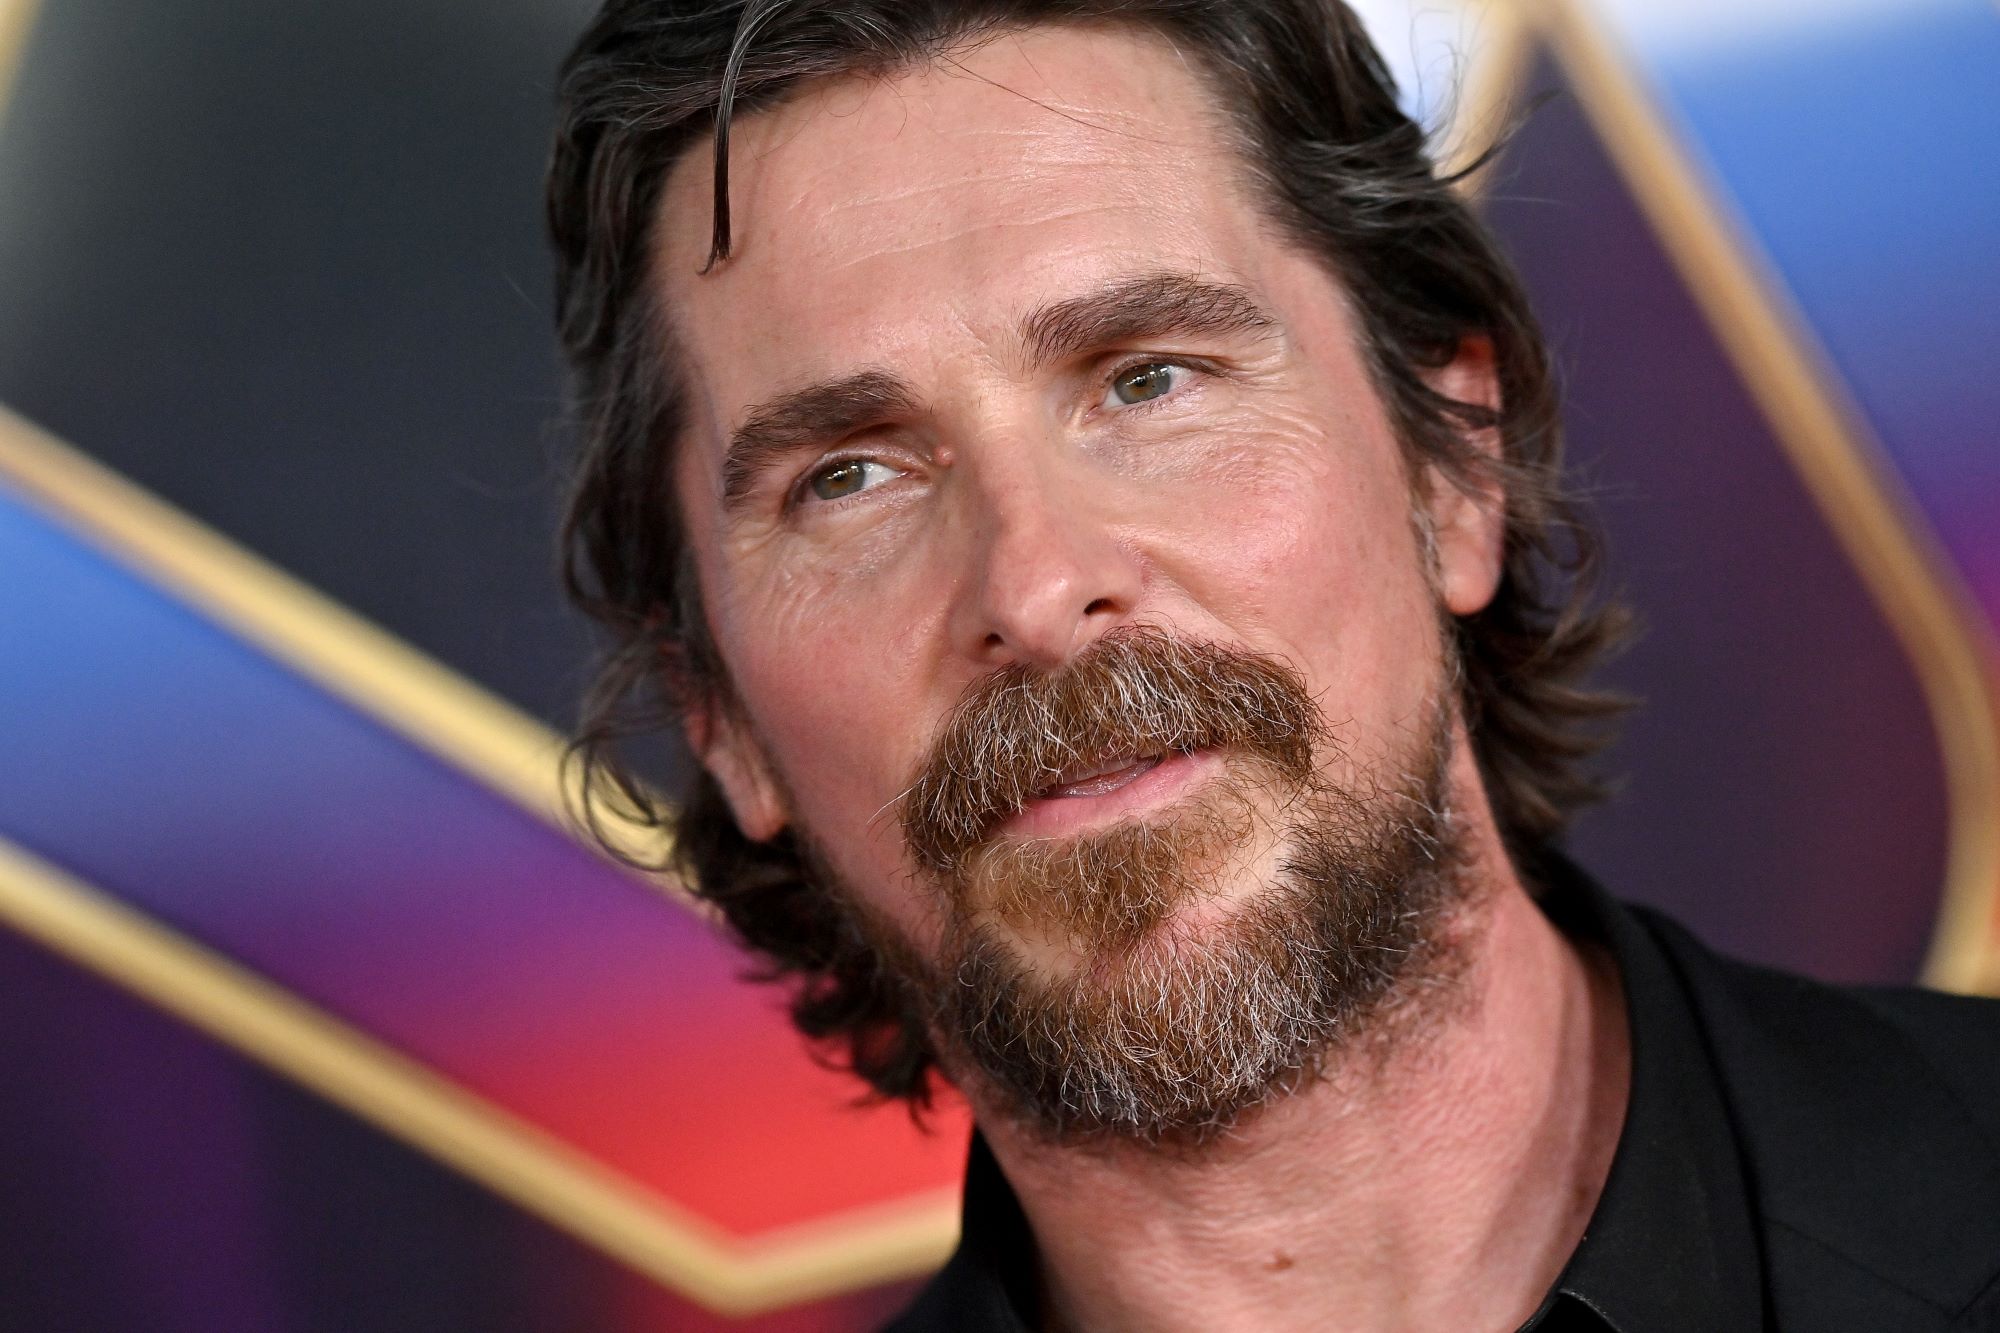 Christian Bale, whose character Gorr loses his daughter in 'Thor: Love and Thunder,' wears a black suit.